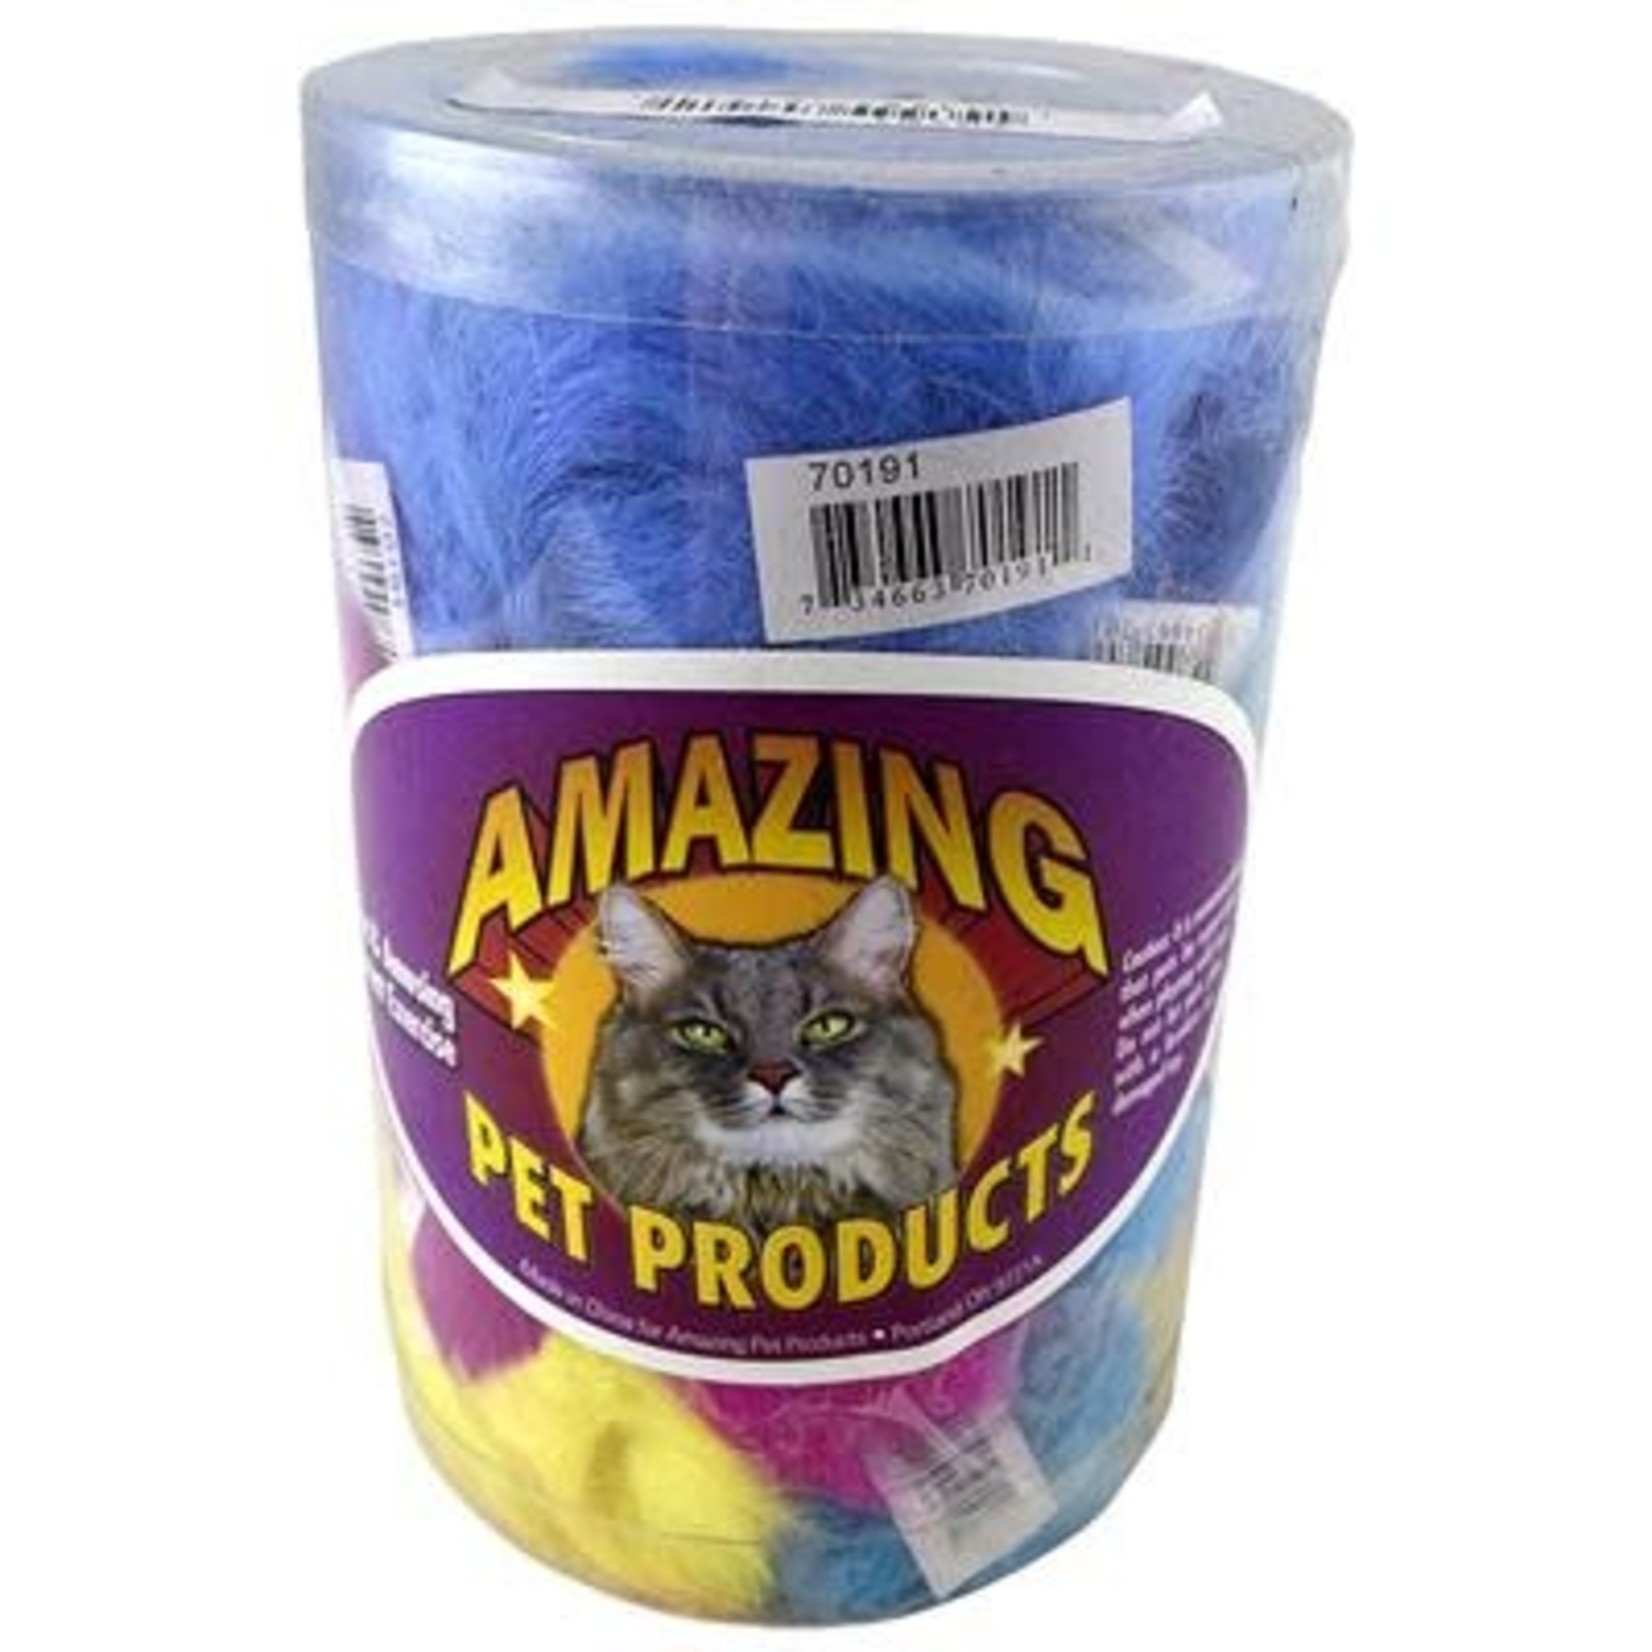 Amazing Pet Products Real Fur Colourful 2" Cat Toy each